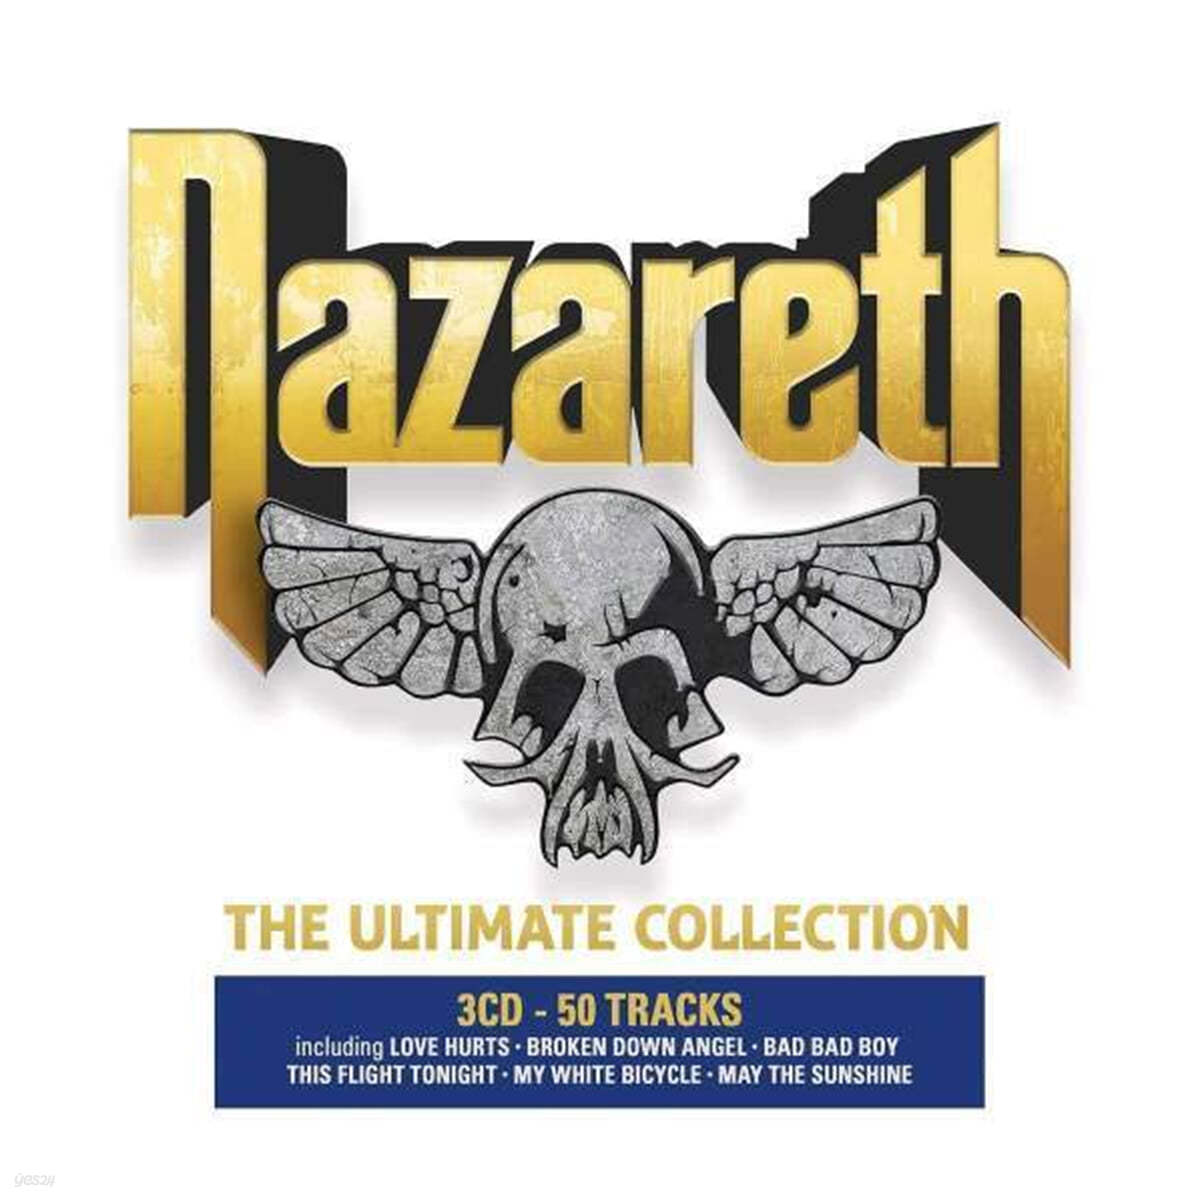 Nazareth (나자레스) - The Ultimate Collection 